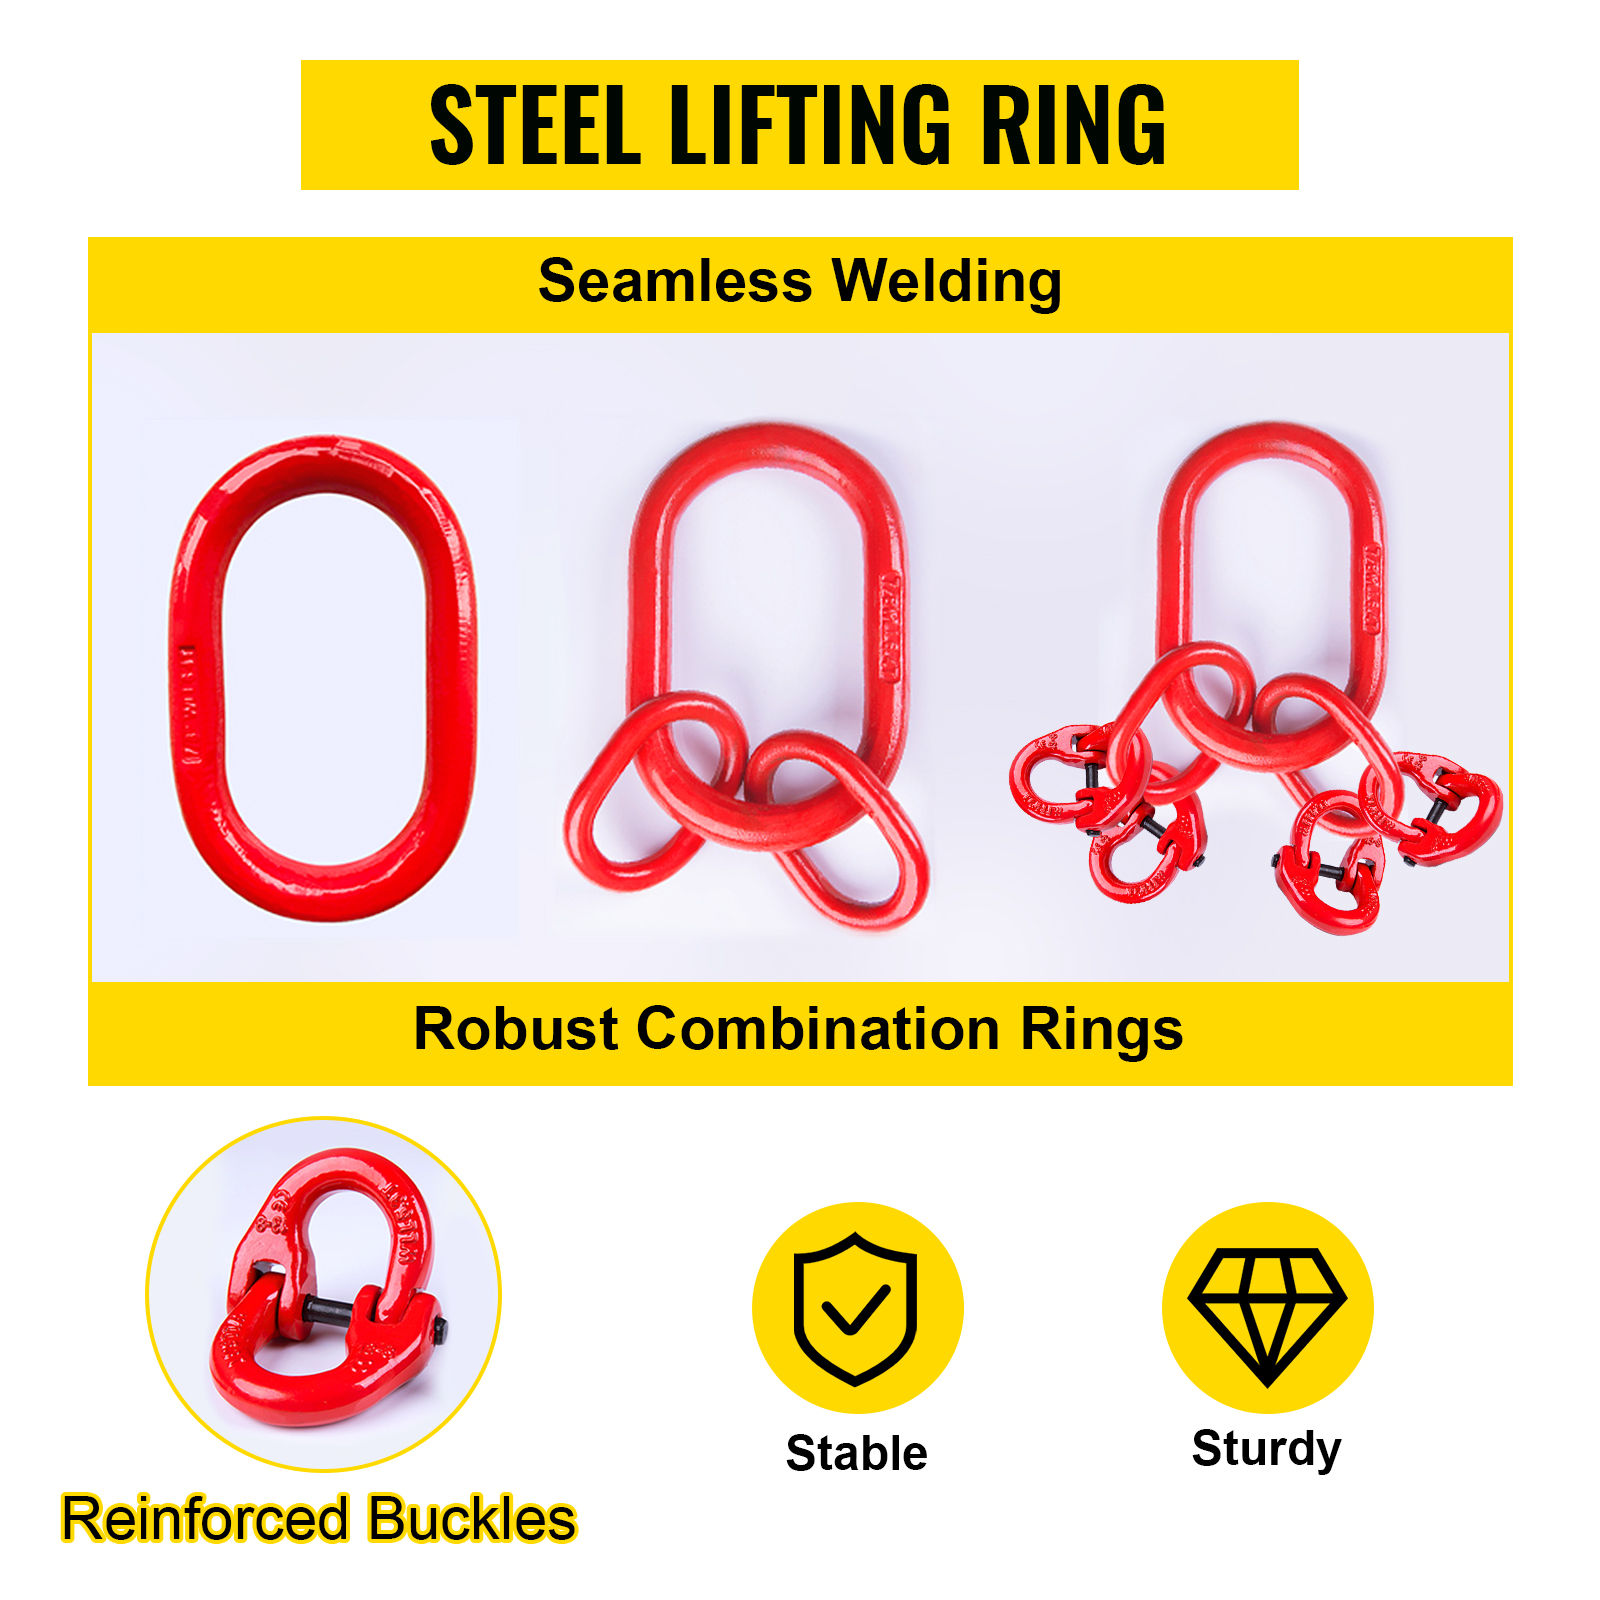 Happybuy 5Ft Chain Sling 5/16 Inch X 5 Ft Engine Lift Chain G80 Alloy Steel Engine Chain Hoist Lifts 3 Ton With 4 Leg Grab Hooks